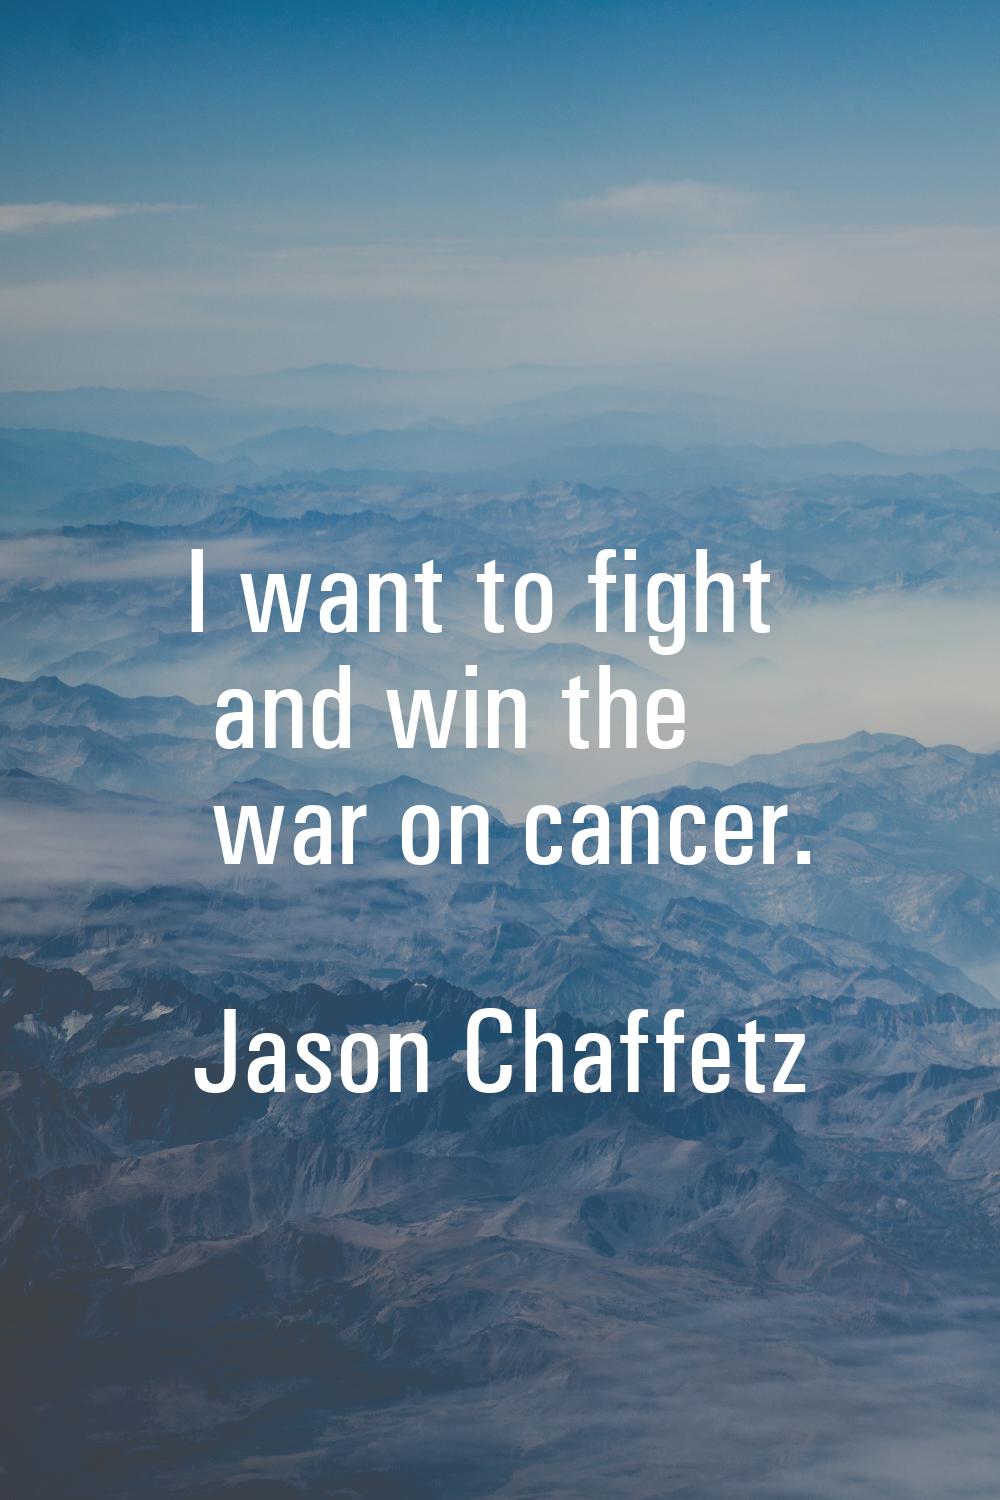 I want to fight and win the war on cancer.